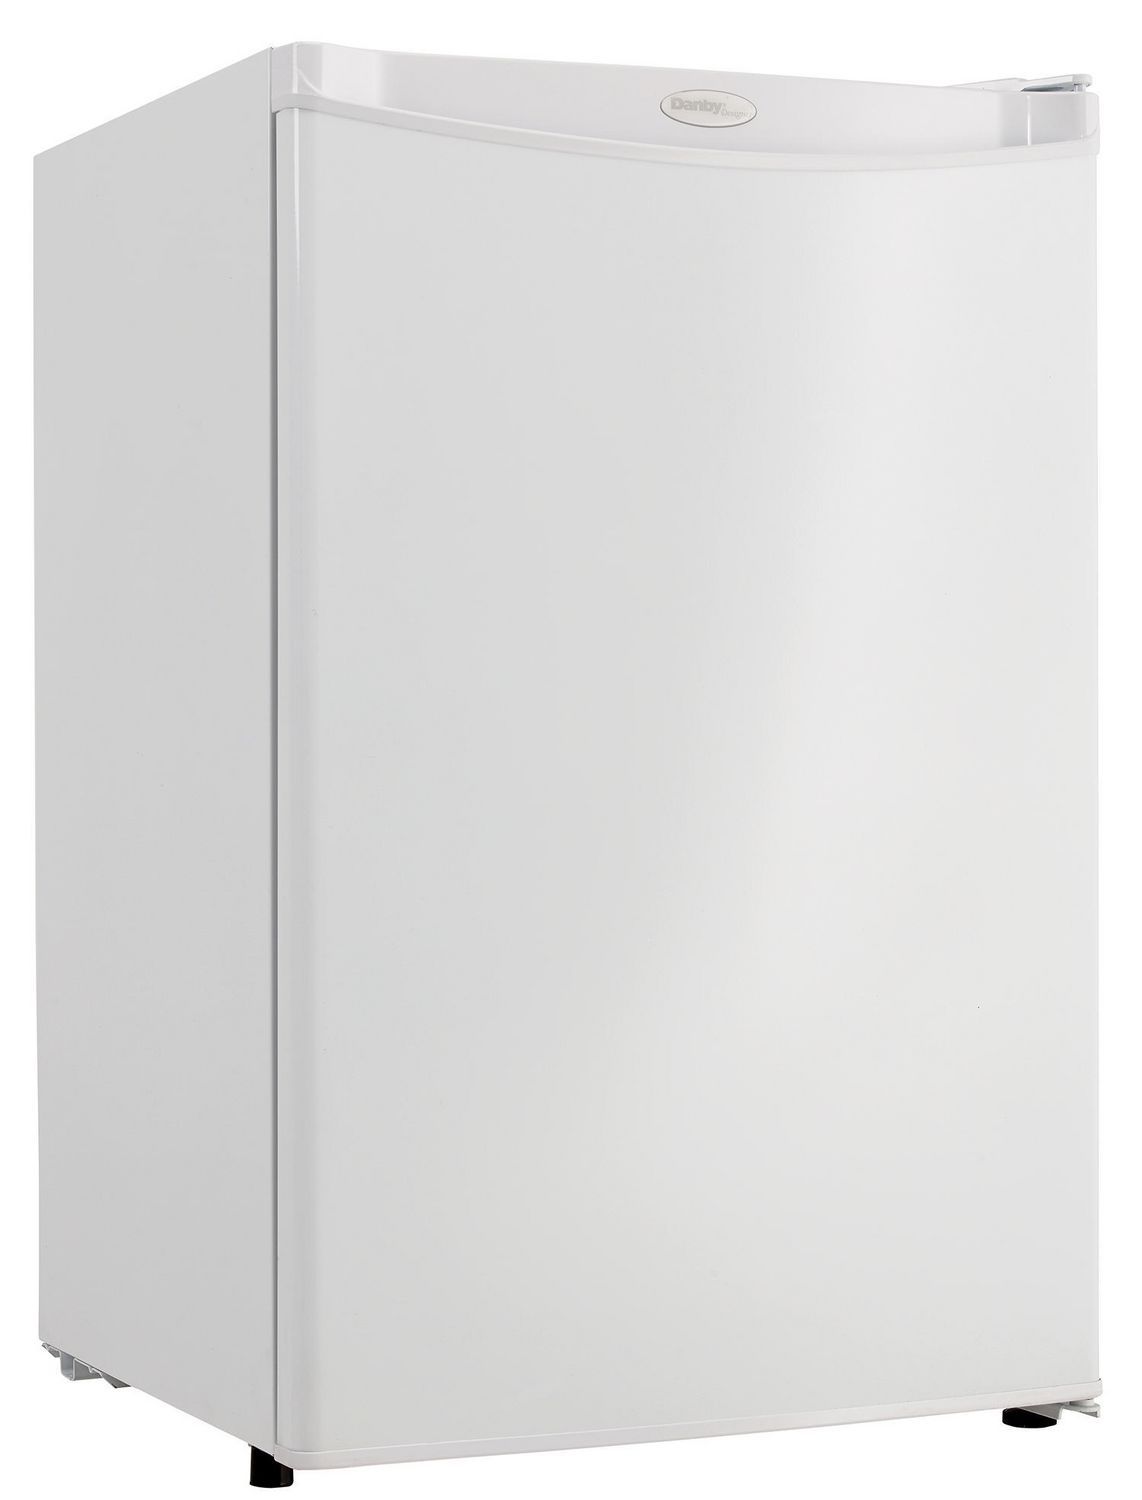 Danby Products Danby Designer 4 4 Cu Ft Compact Refrigerator